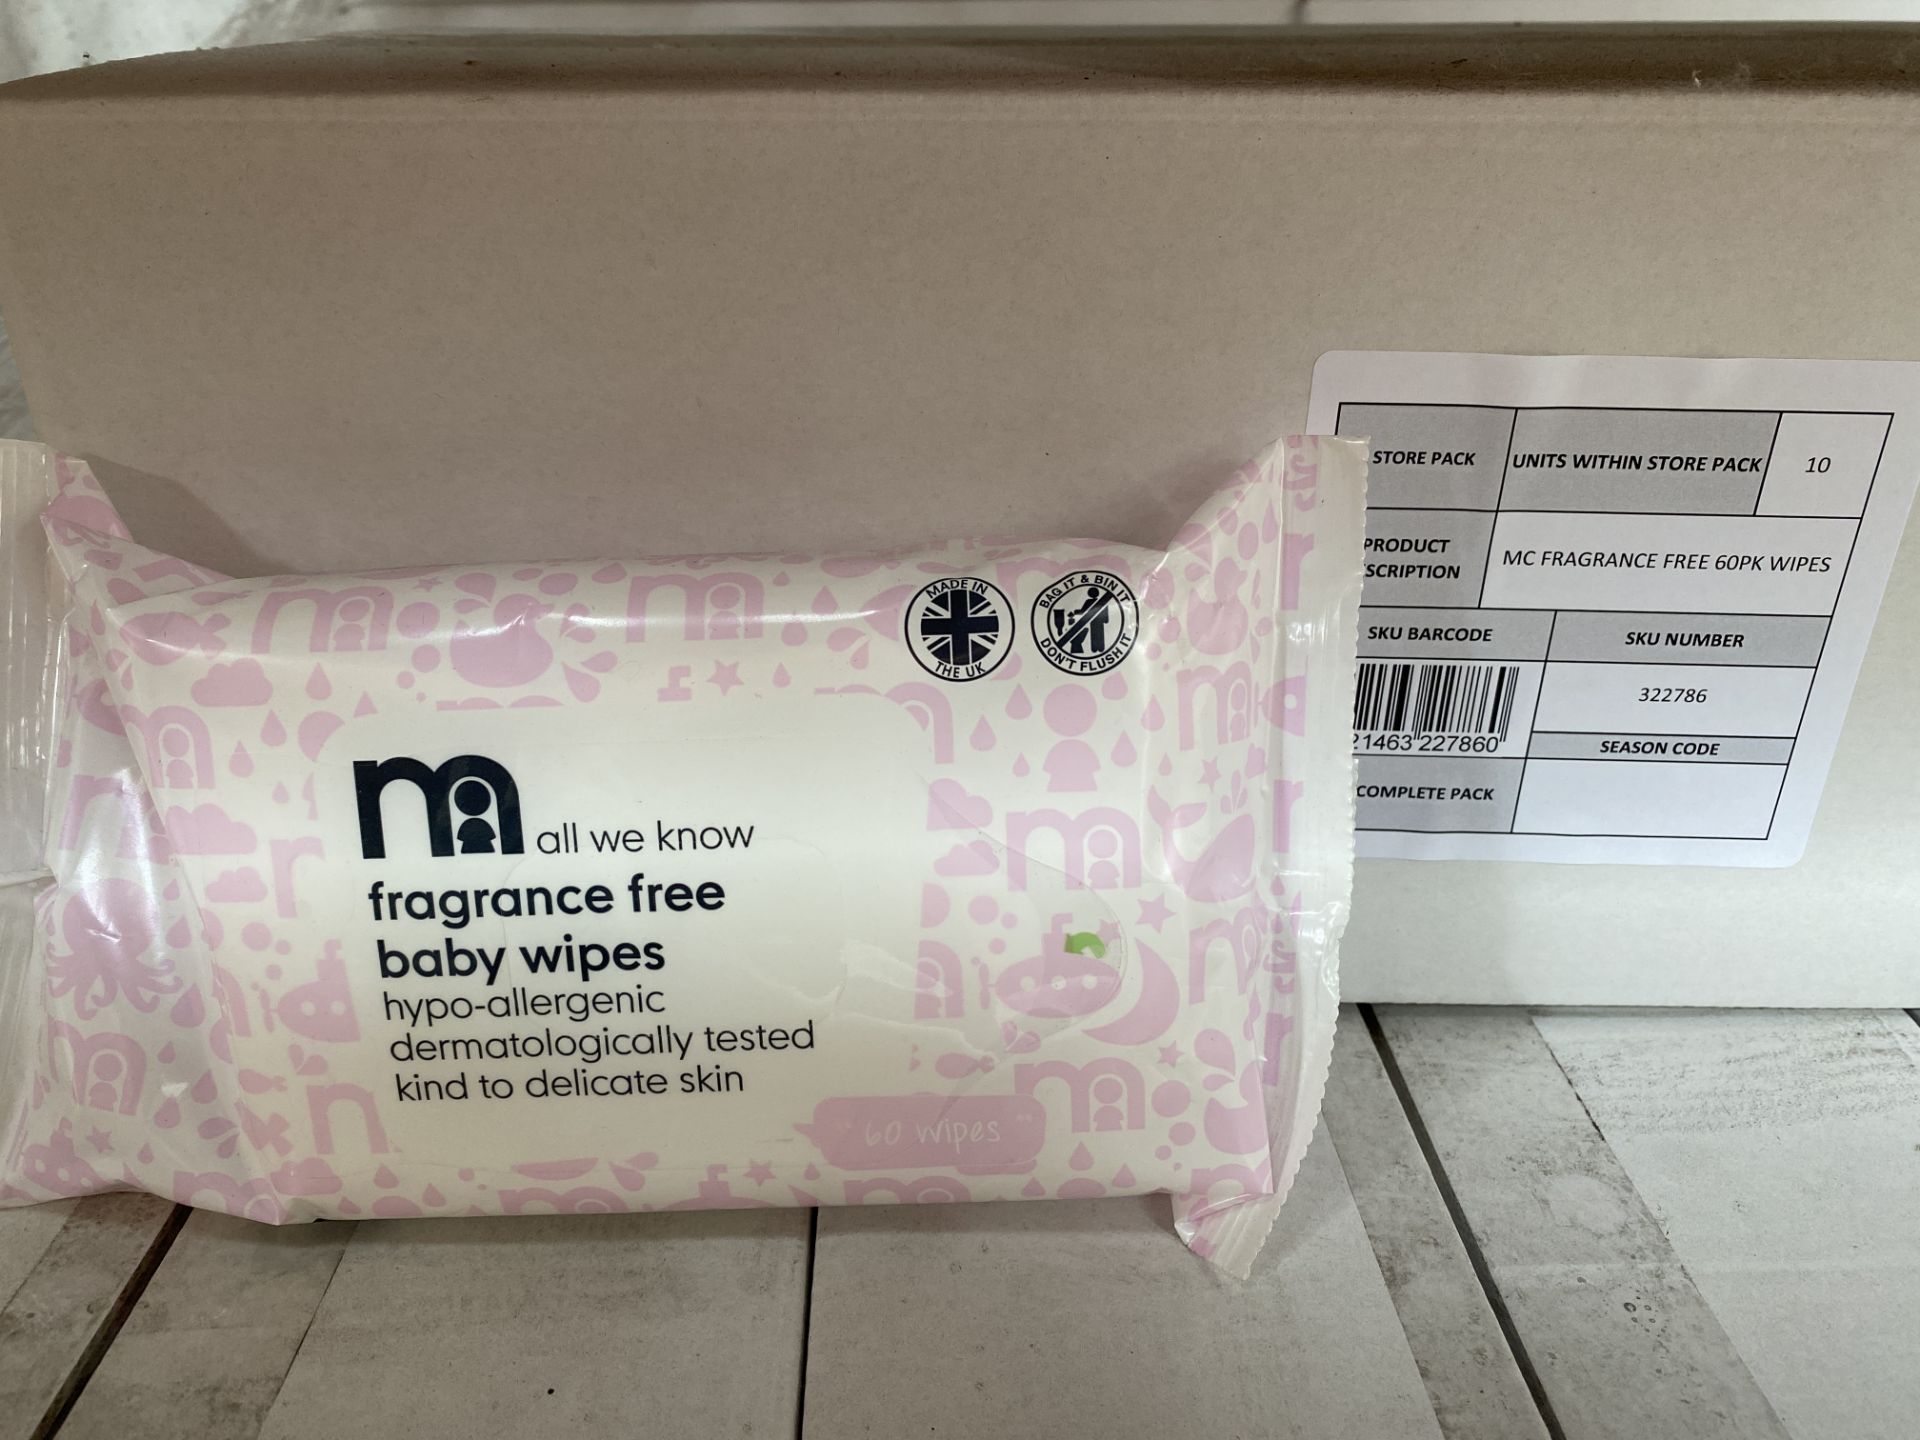 1 x Pallet of 220 x 60 packs of Fragrance Free Mothercare Wipes